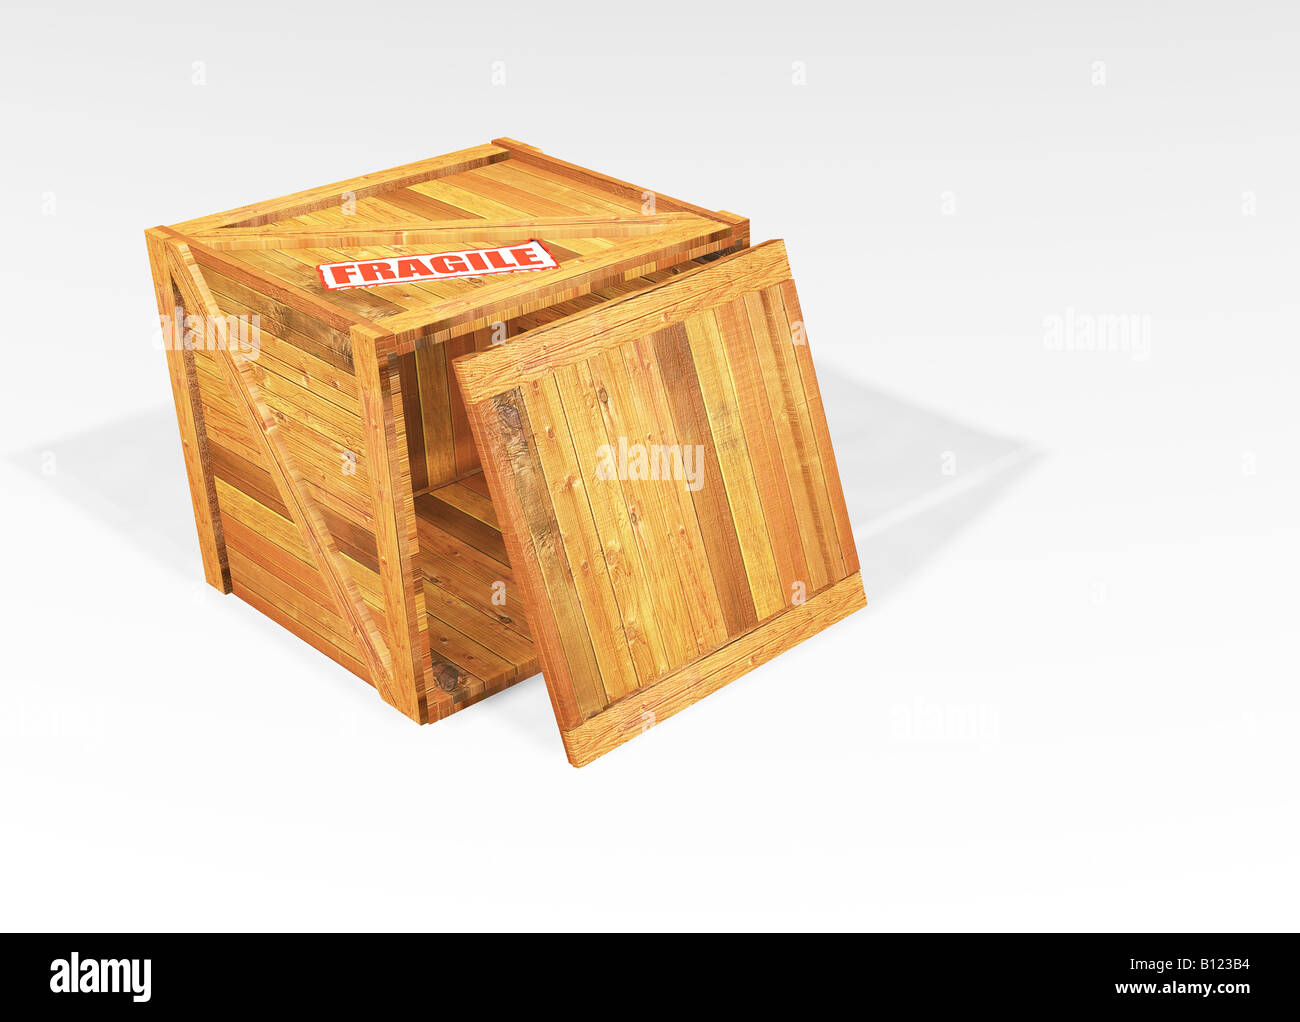 Wooden crate with fragile sticker Stock Photo